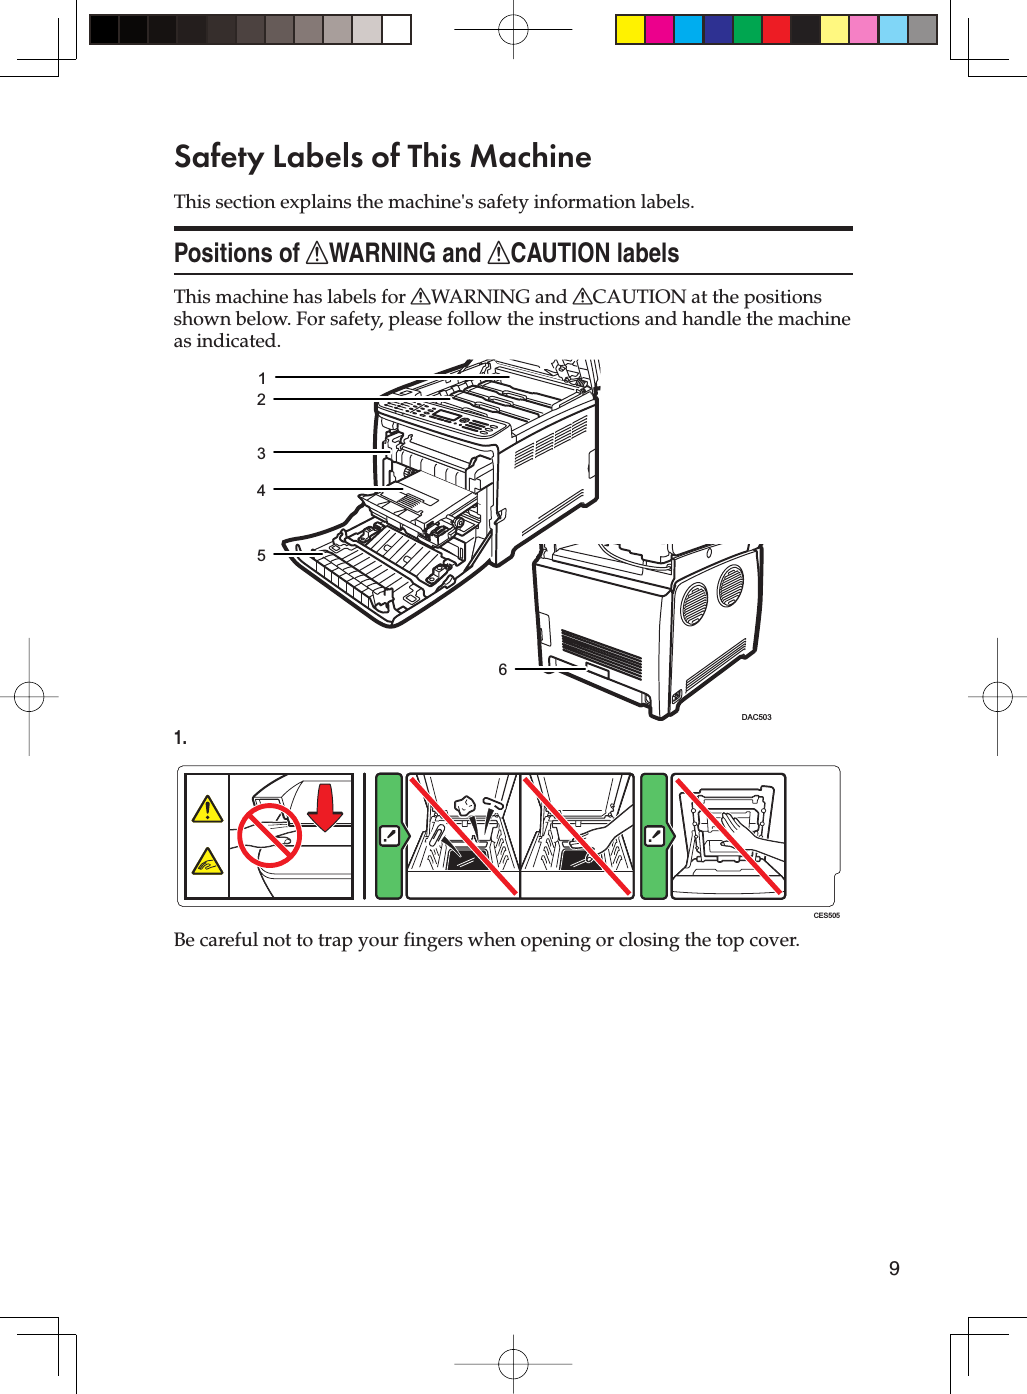 9Safety Labels of This MachineThis section explains the machine&apos;s safety information labels.Positions of RWARNING and RCAUTION labelsThis machine has labels for RWARNING and RCAUTION at the positions shown below. For safety, please follow the instructions and handle the machine as indicated.123456DAC5031.CES505Be careful not to trap your fingers when opening or closing the top cover.